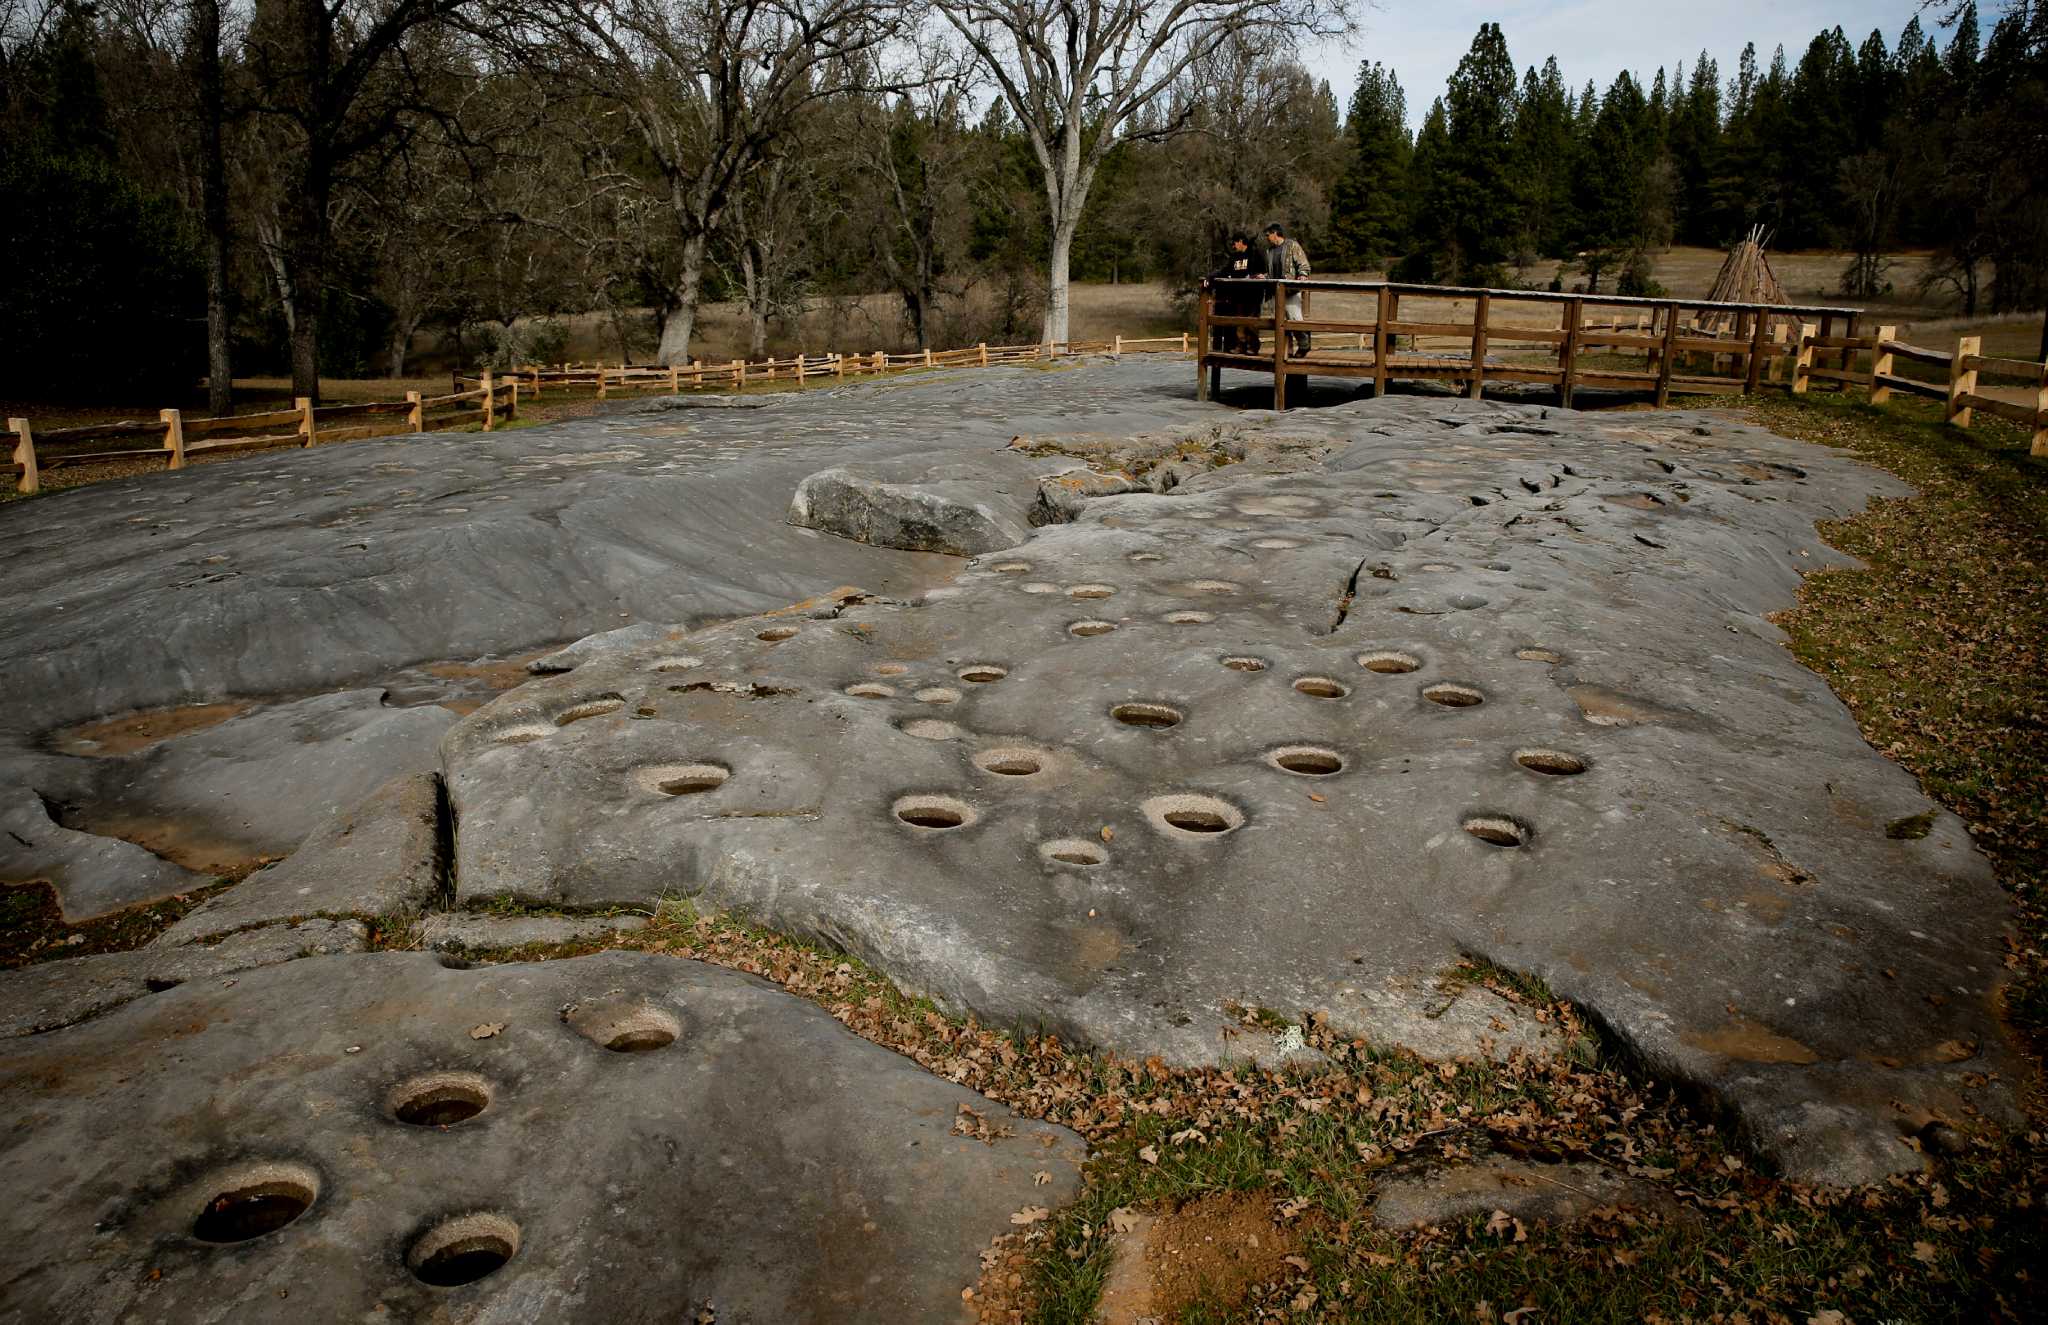 Amador County: Miwuk tribe gives back by revitalizing parks - SFGate2048 x 1325